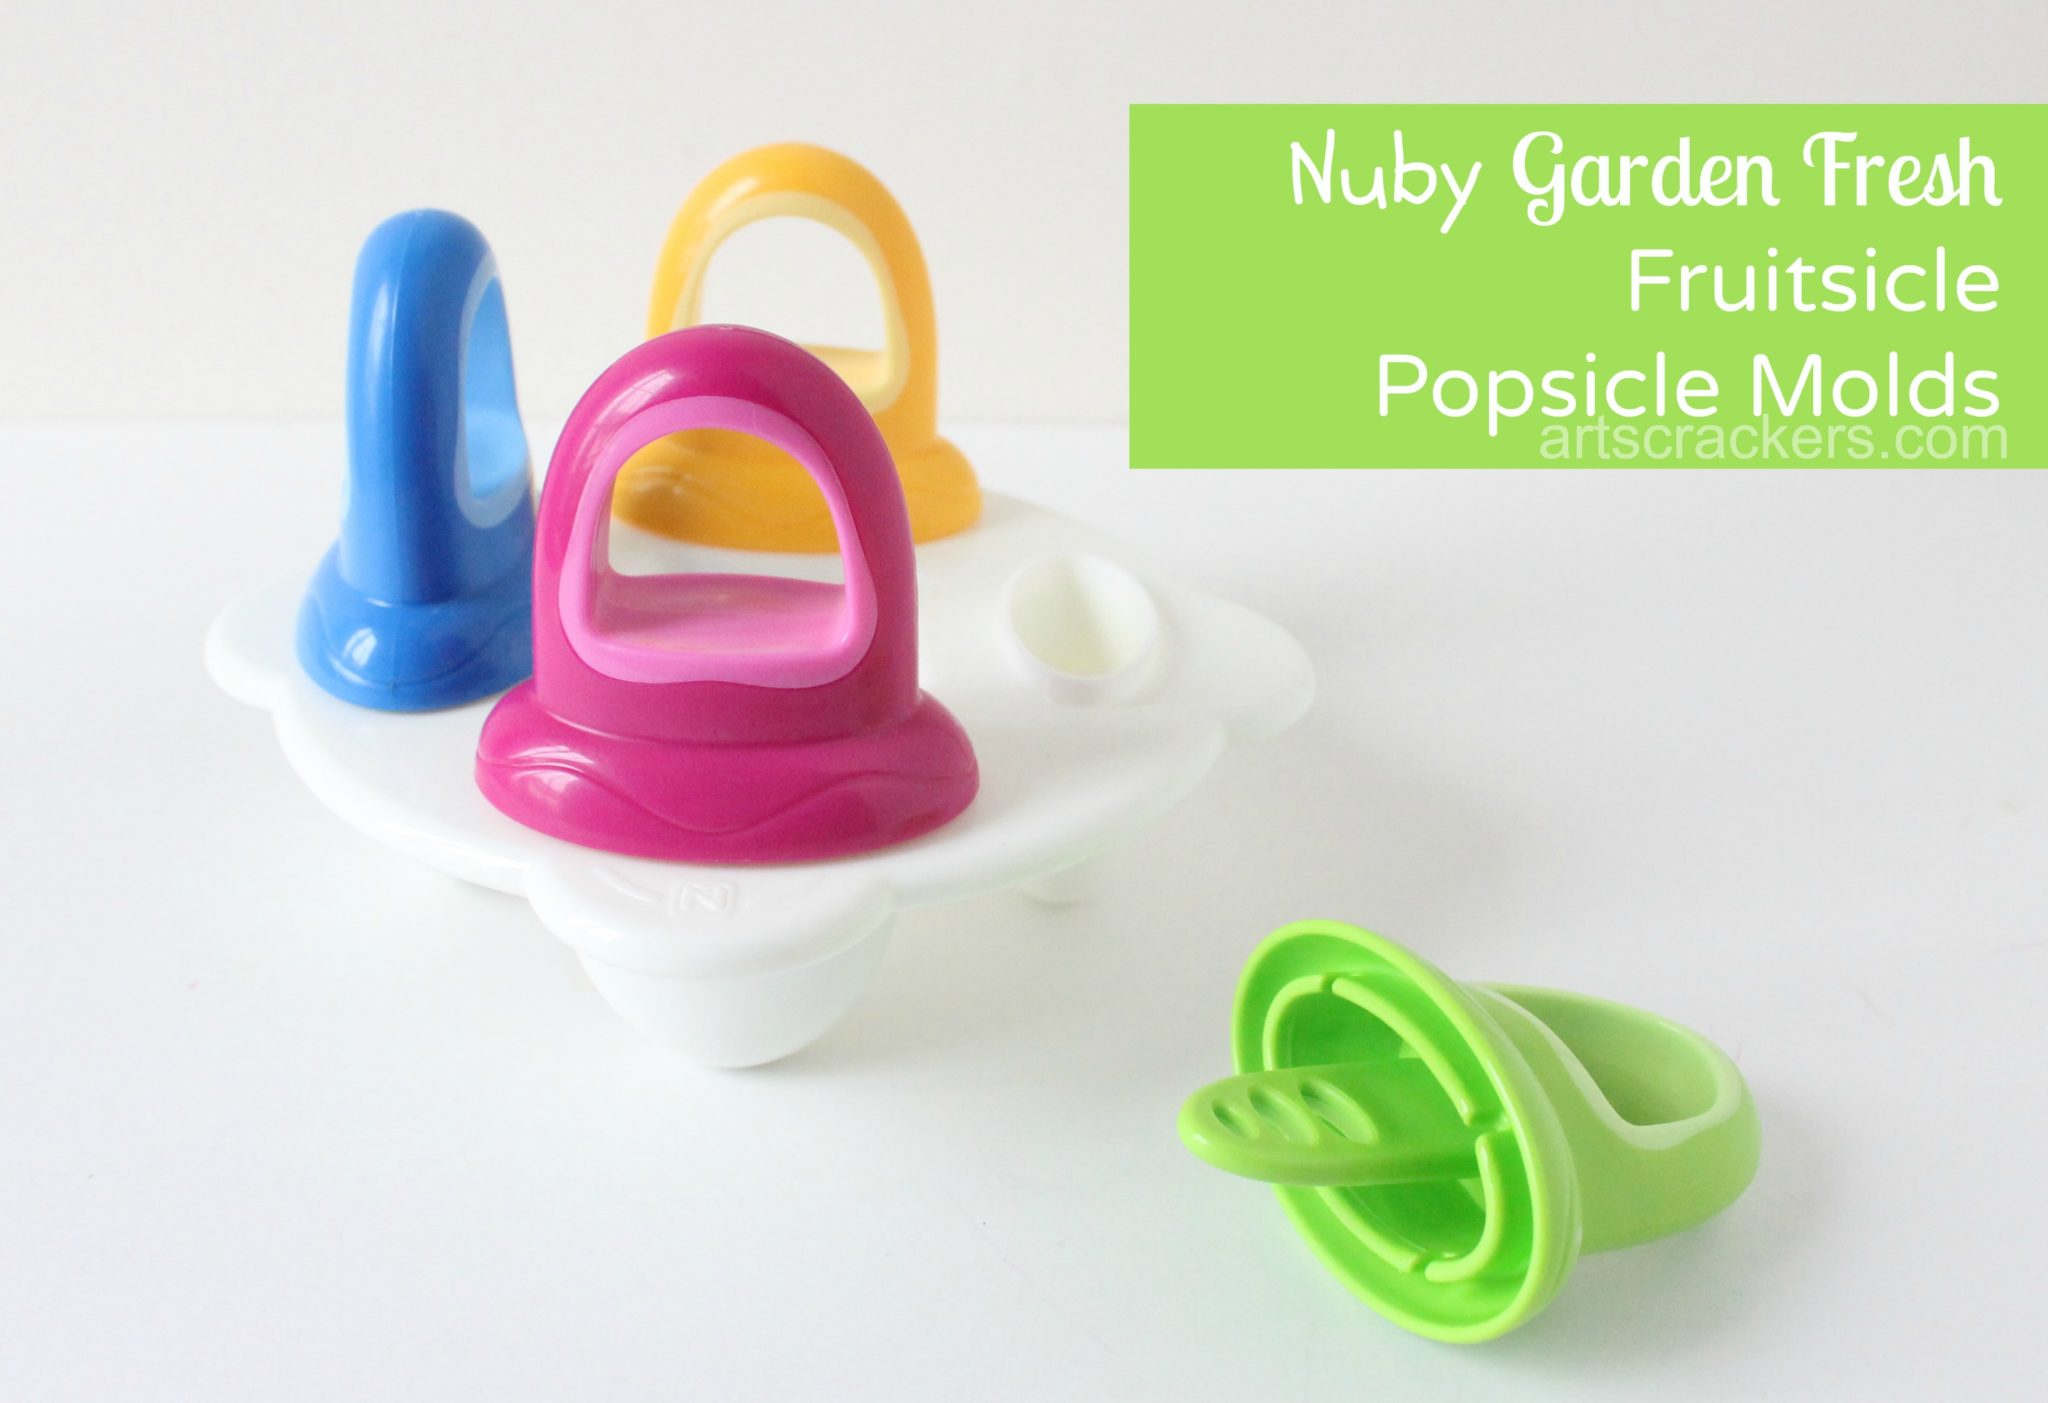 Nuby Garden Fresh Fruitsicle Freezer Pop Molds. Click the picture to read the review.